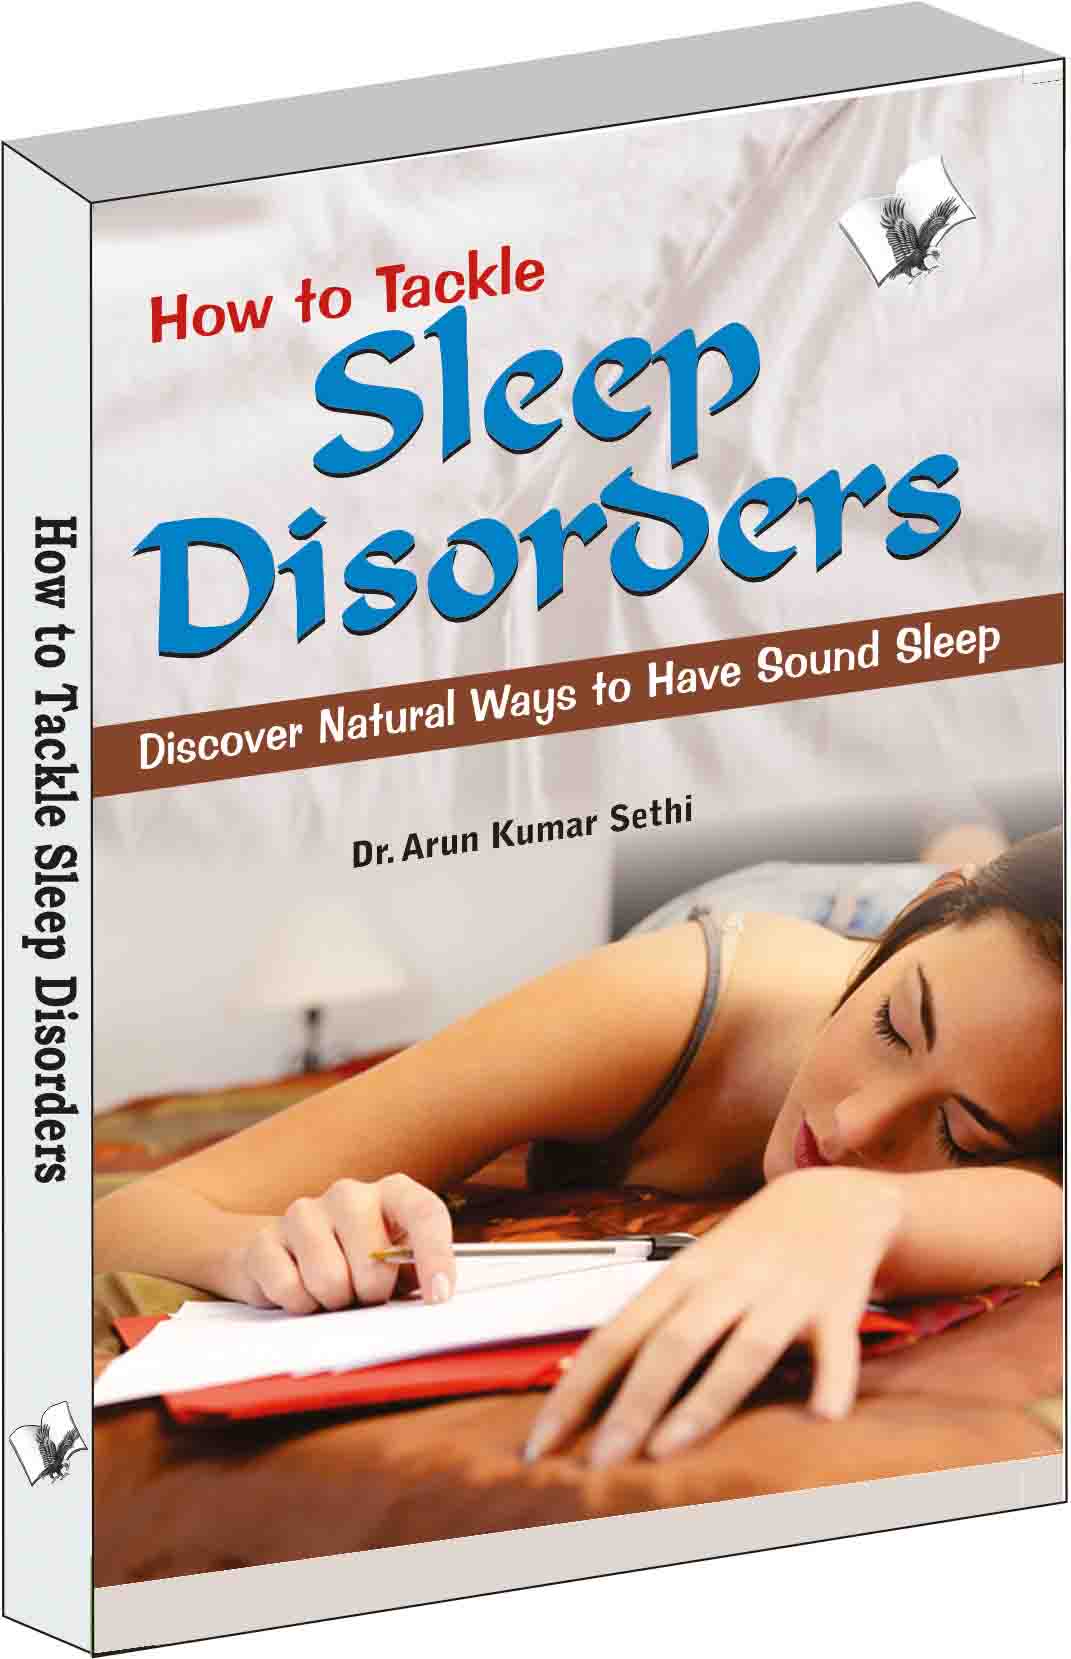 How to Tackle Sleep Disorders-Discover Natural Ways to Have Sound Sleep